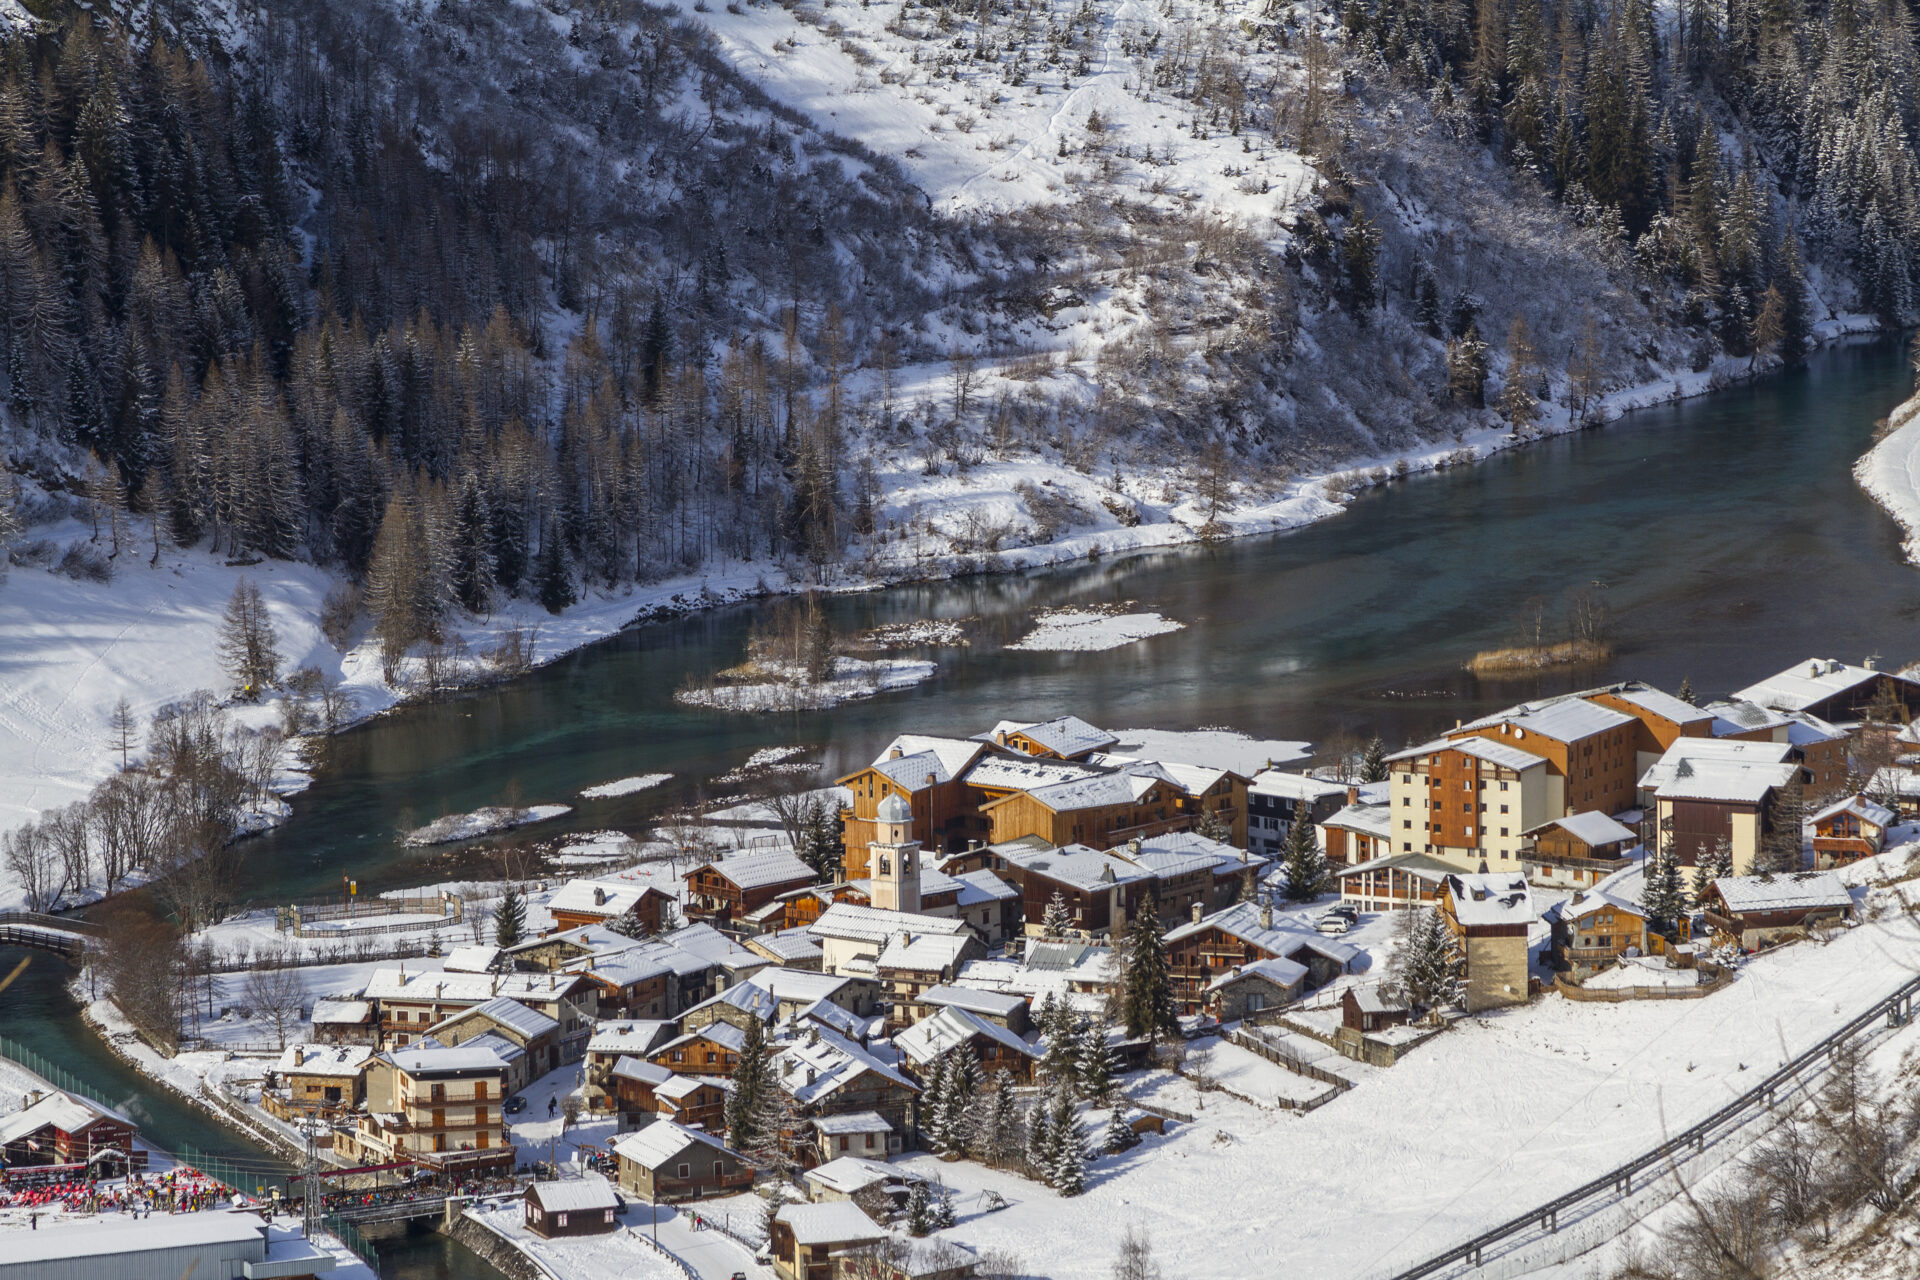 An image of the river in Tignes